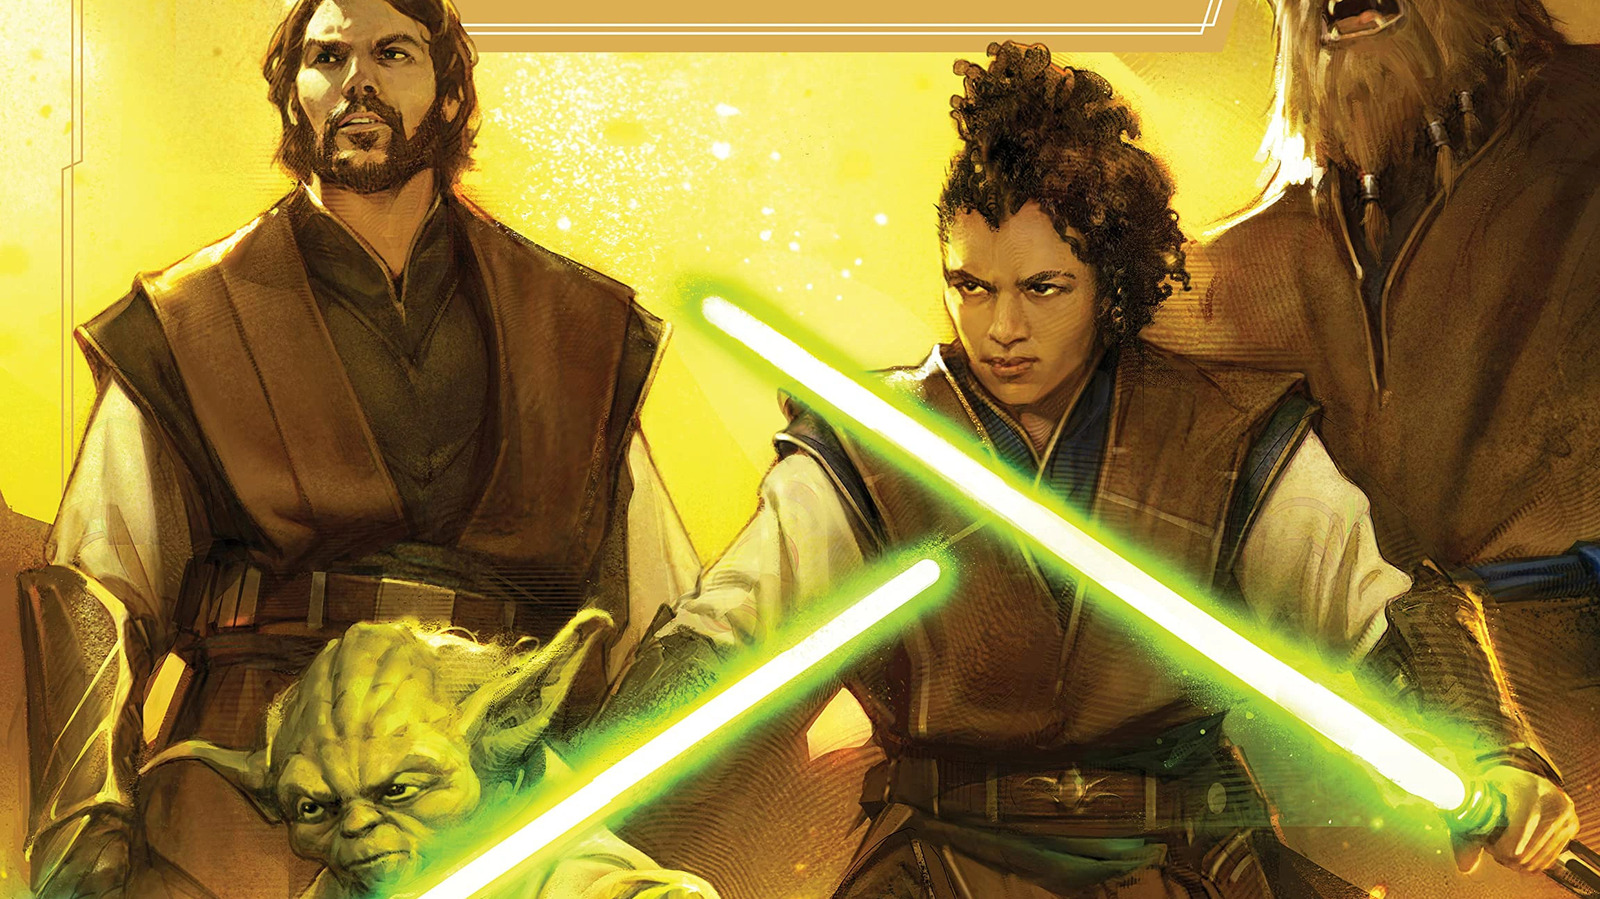 The Art of Star Wars: High Republic Author Kristin Baver on Organizing and Executing [Exclusive Interview]